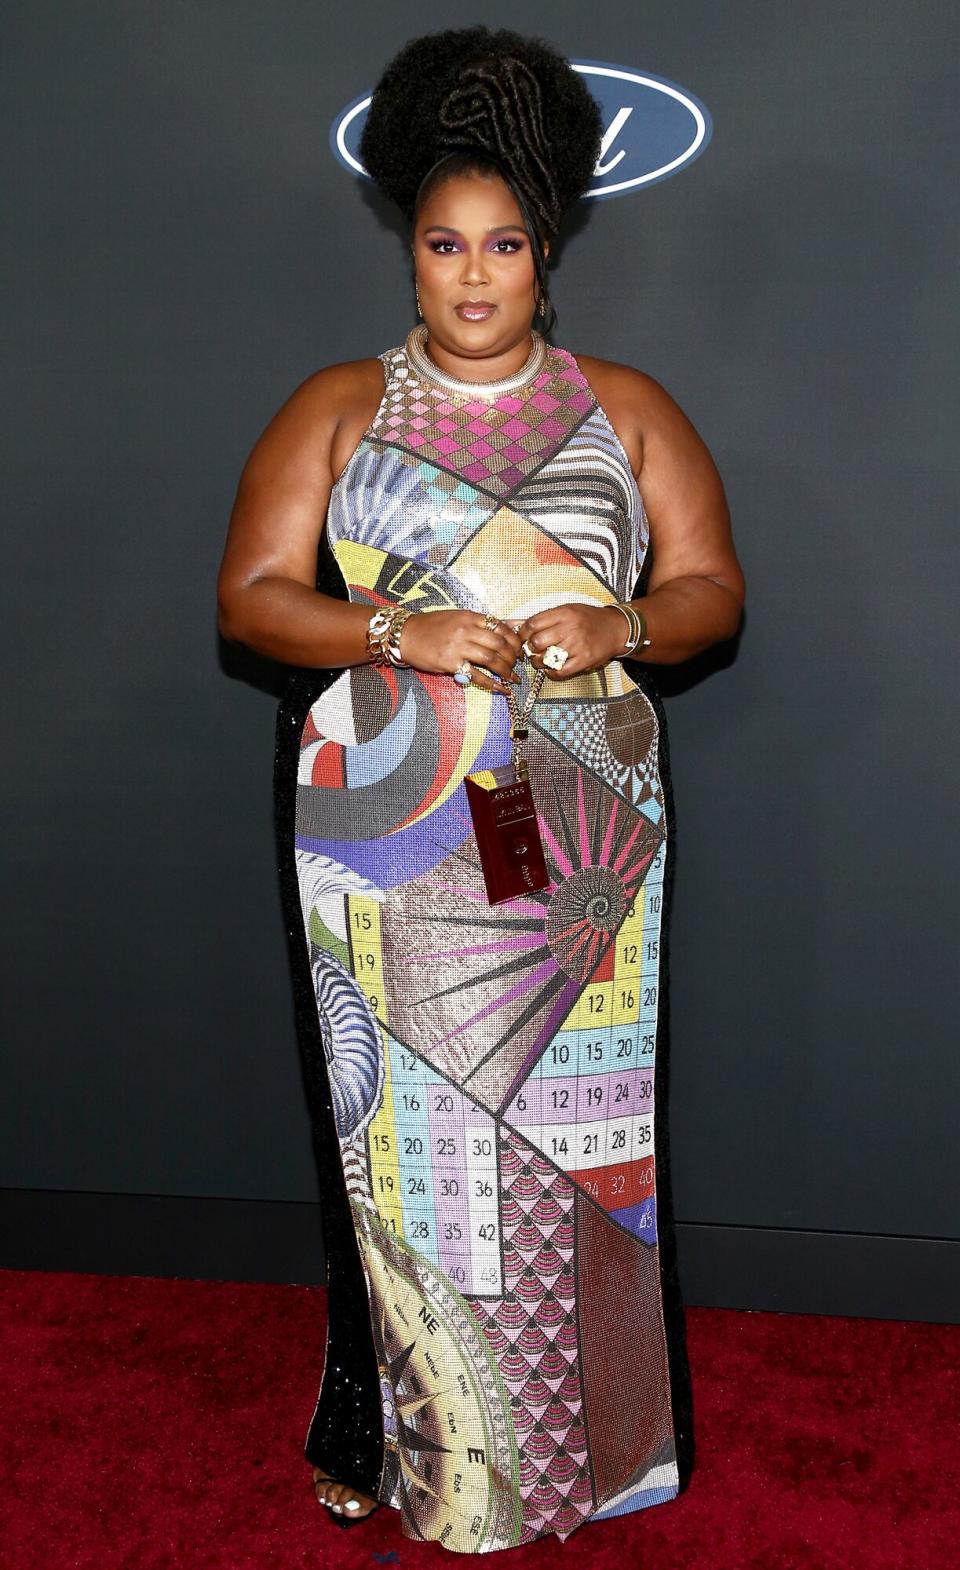 Lizzo attends the 51st NAACP Image Awards, Presented by BET, at Pasadena Civic Auditorium on February 22, 2020 in Pasadena, California